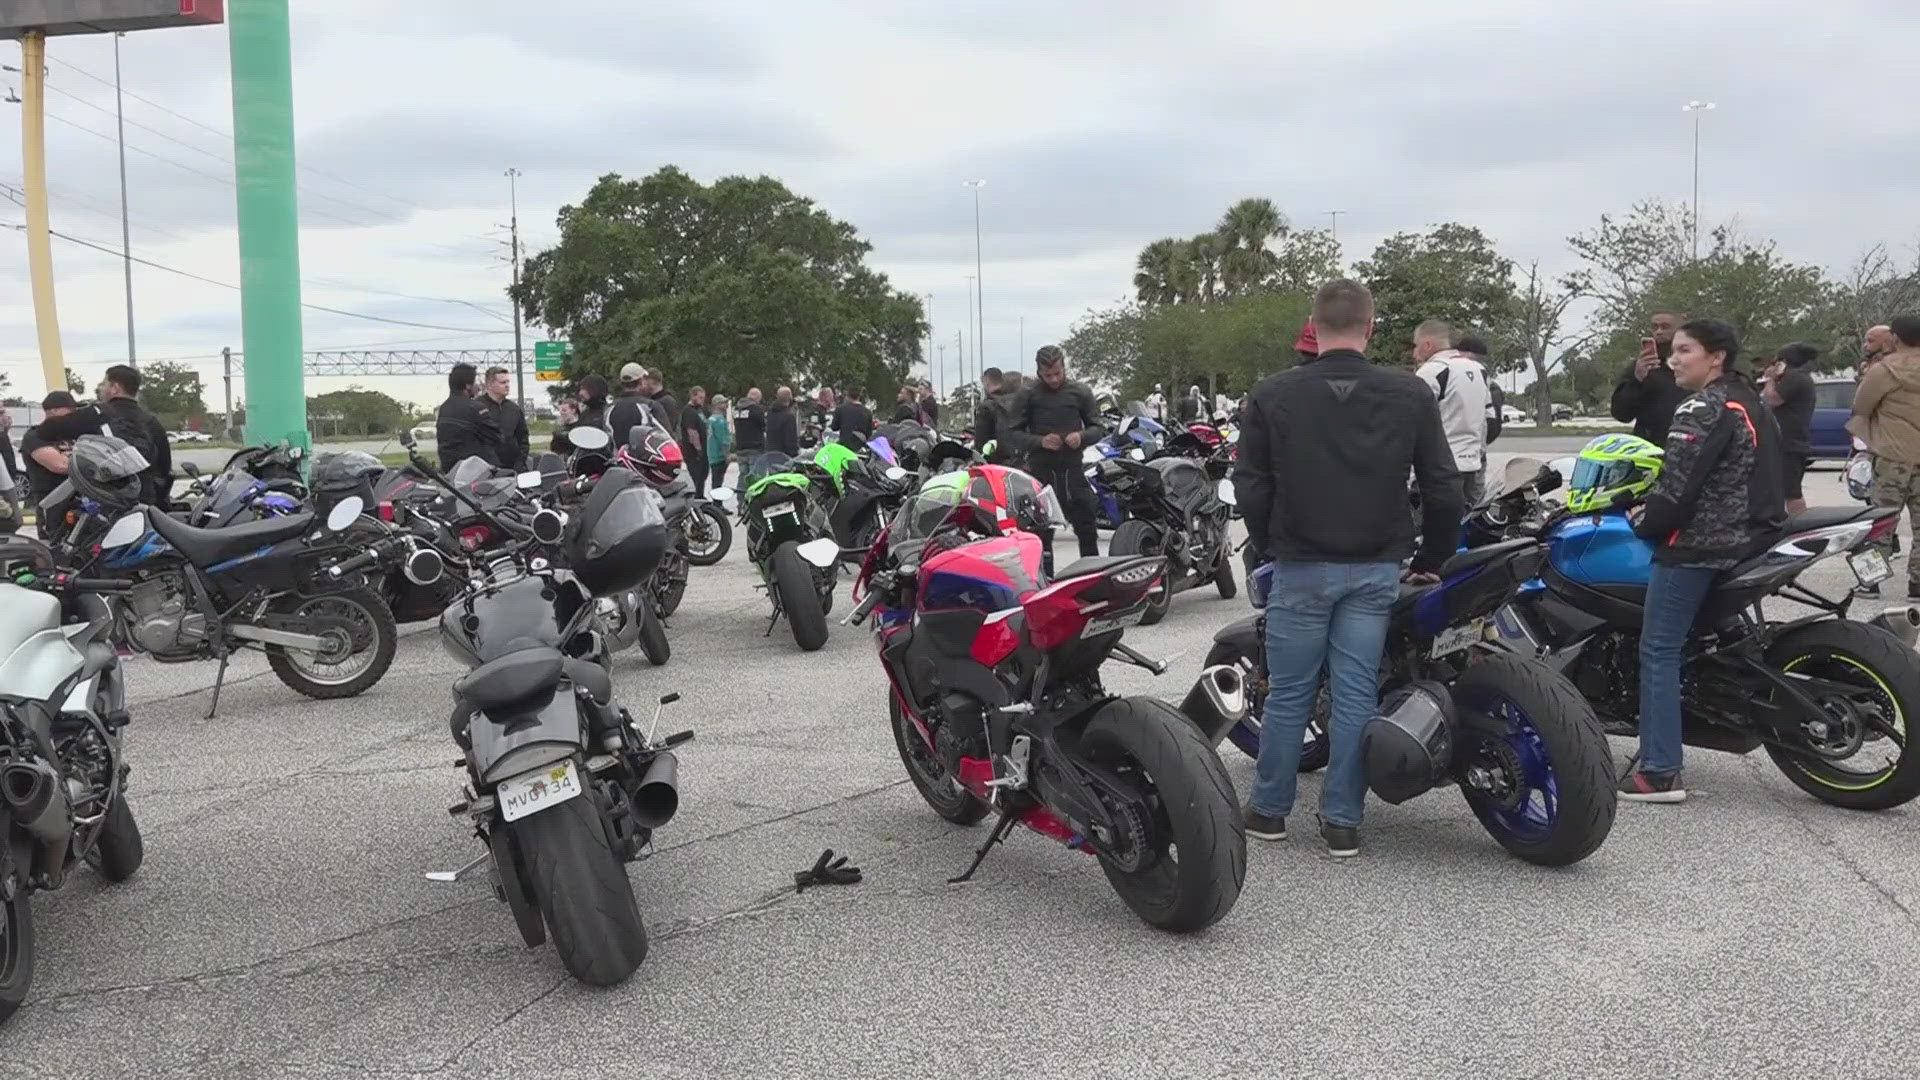 A motorcycle safety instructor says a training track would go a long way in making sure riders are ready for the roads.